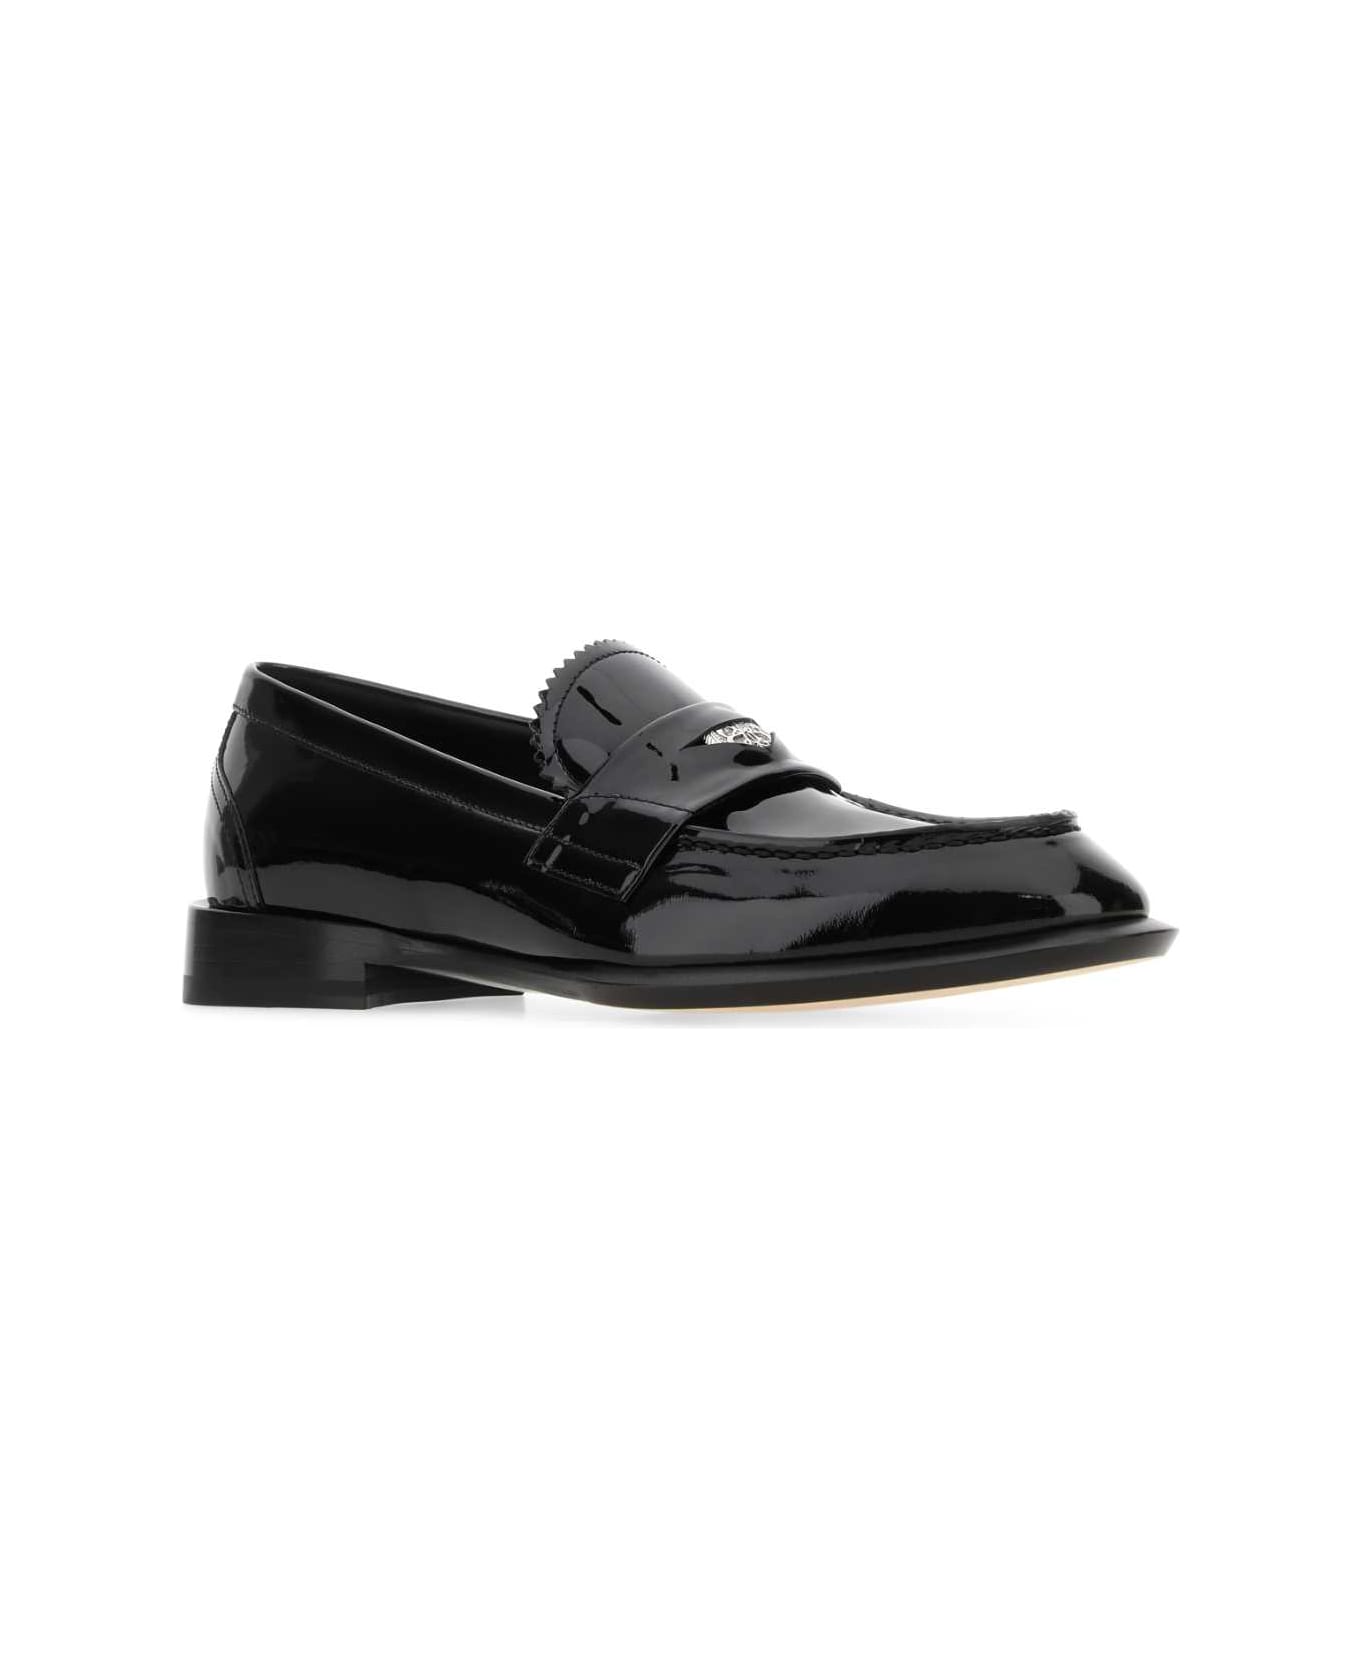 Alexander McQueen Black Leather Loafers - 1081